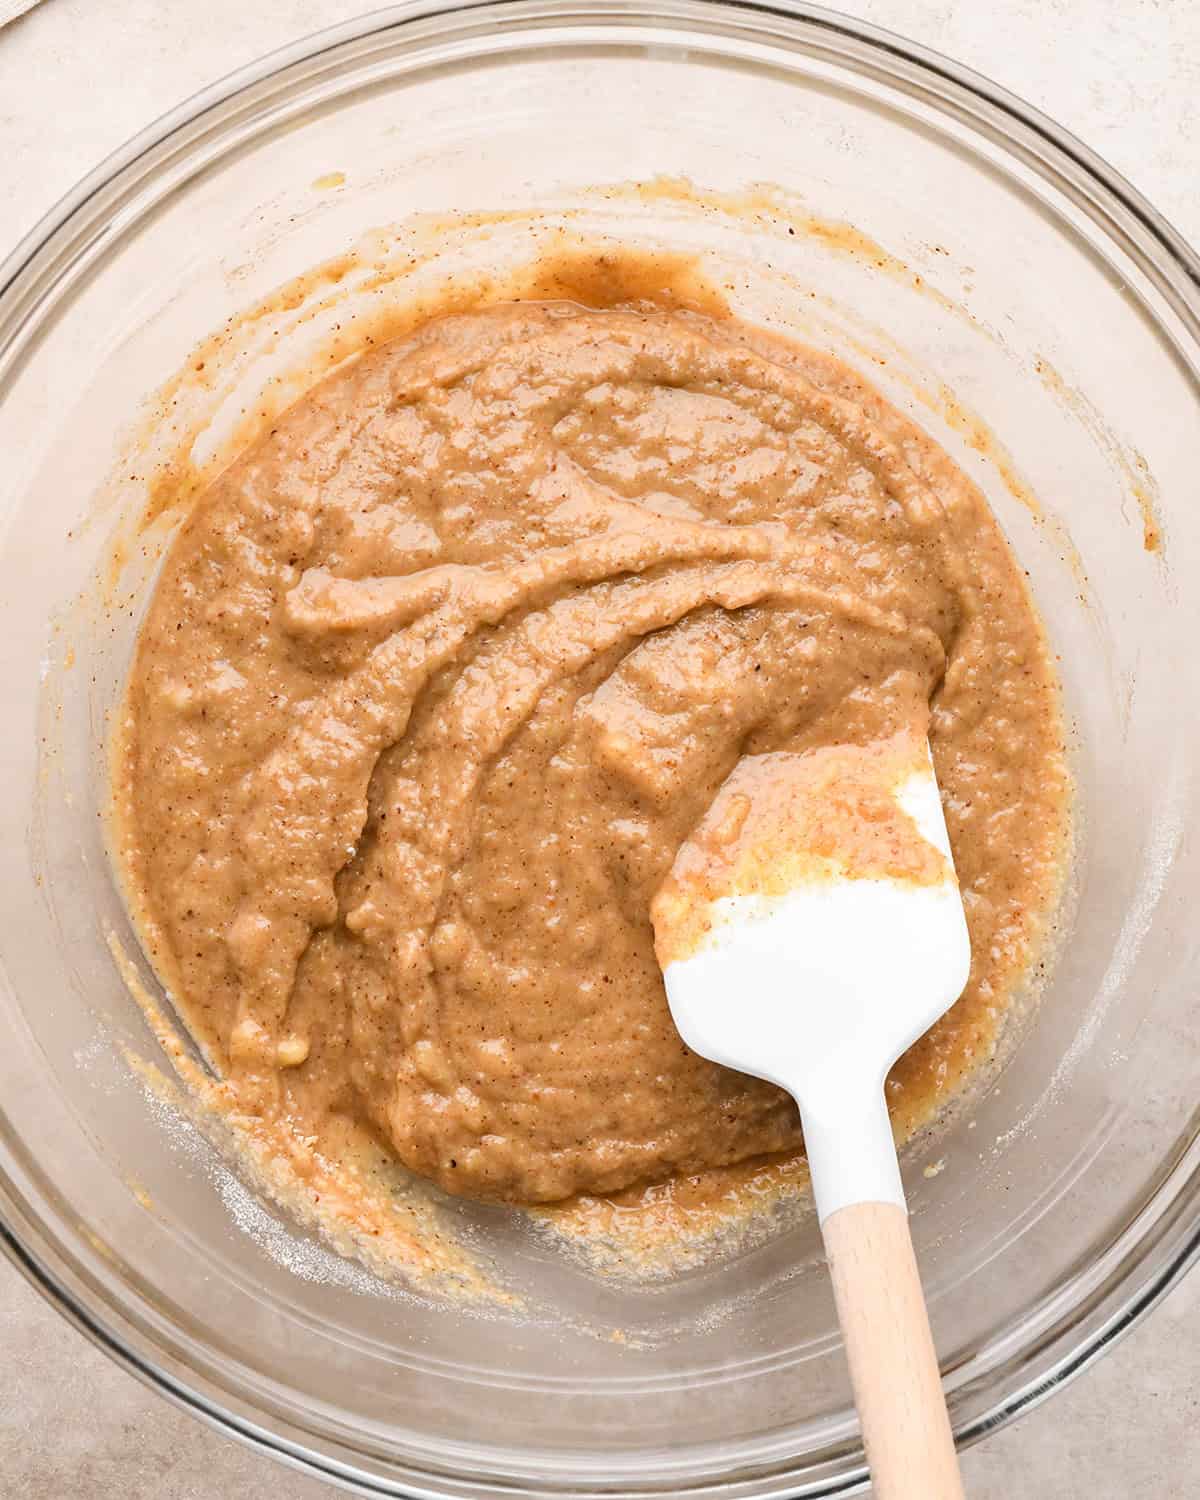 how to make paleo banana bread - batter after being mixed and resting for 5 minutes to thicken